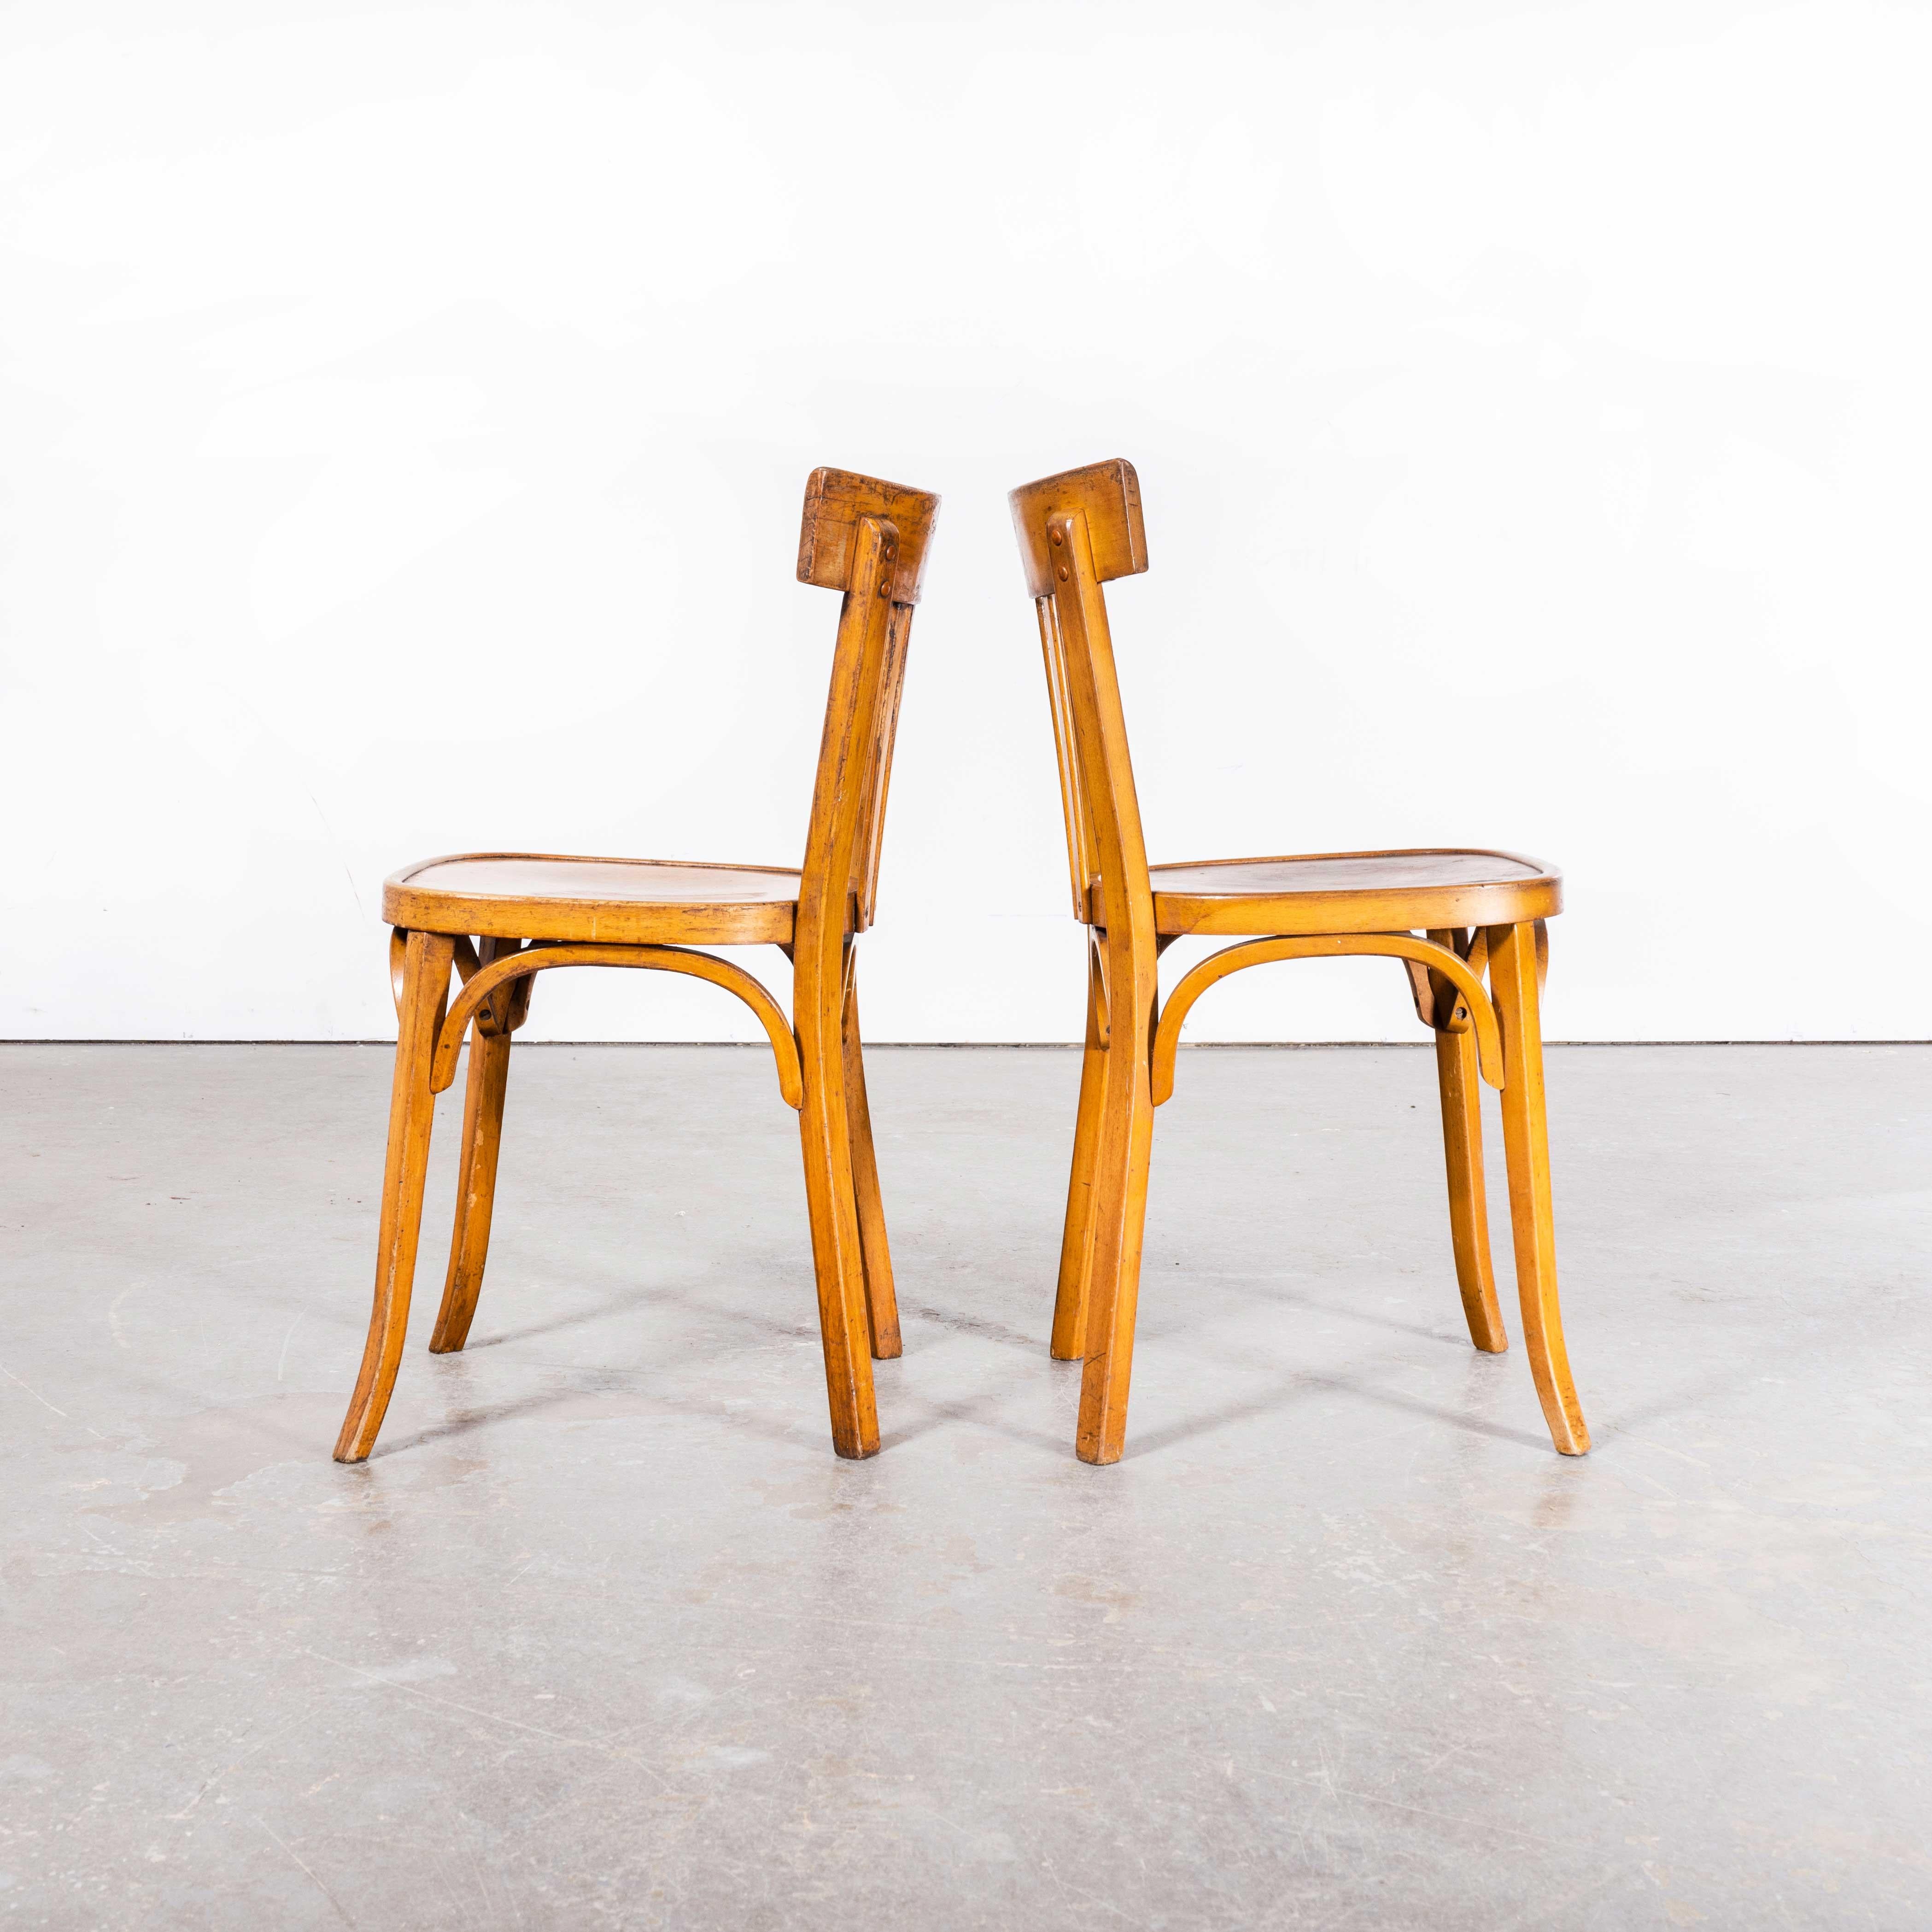 Mid-20th Century 1950s Luterma Warm Oak Bentwood Dining Chair - Pair For Sale